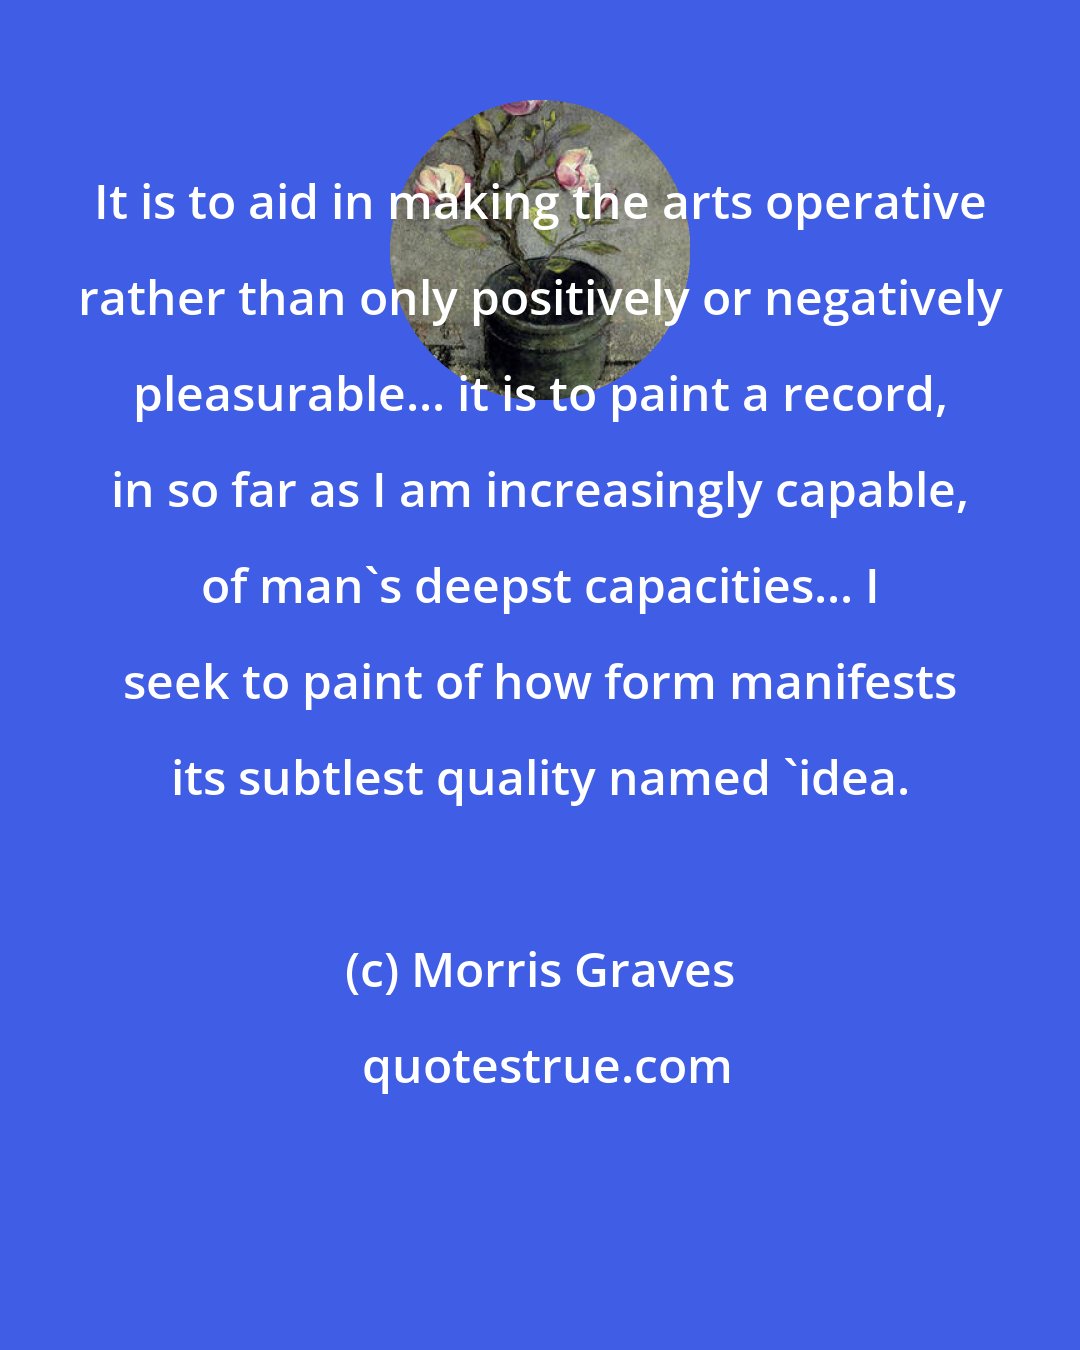 Morris Graves: It is to aid in making the arts operative rather than only positively or negatively pleasurable... it is to paint a record, in so far as I am increasingly capable, of man's deepst capacities... I seek to paint of how form manifests its subtlest quality named 'idea.